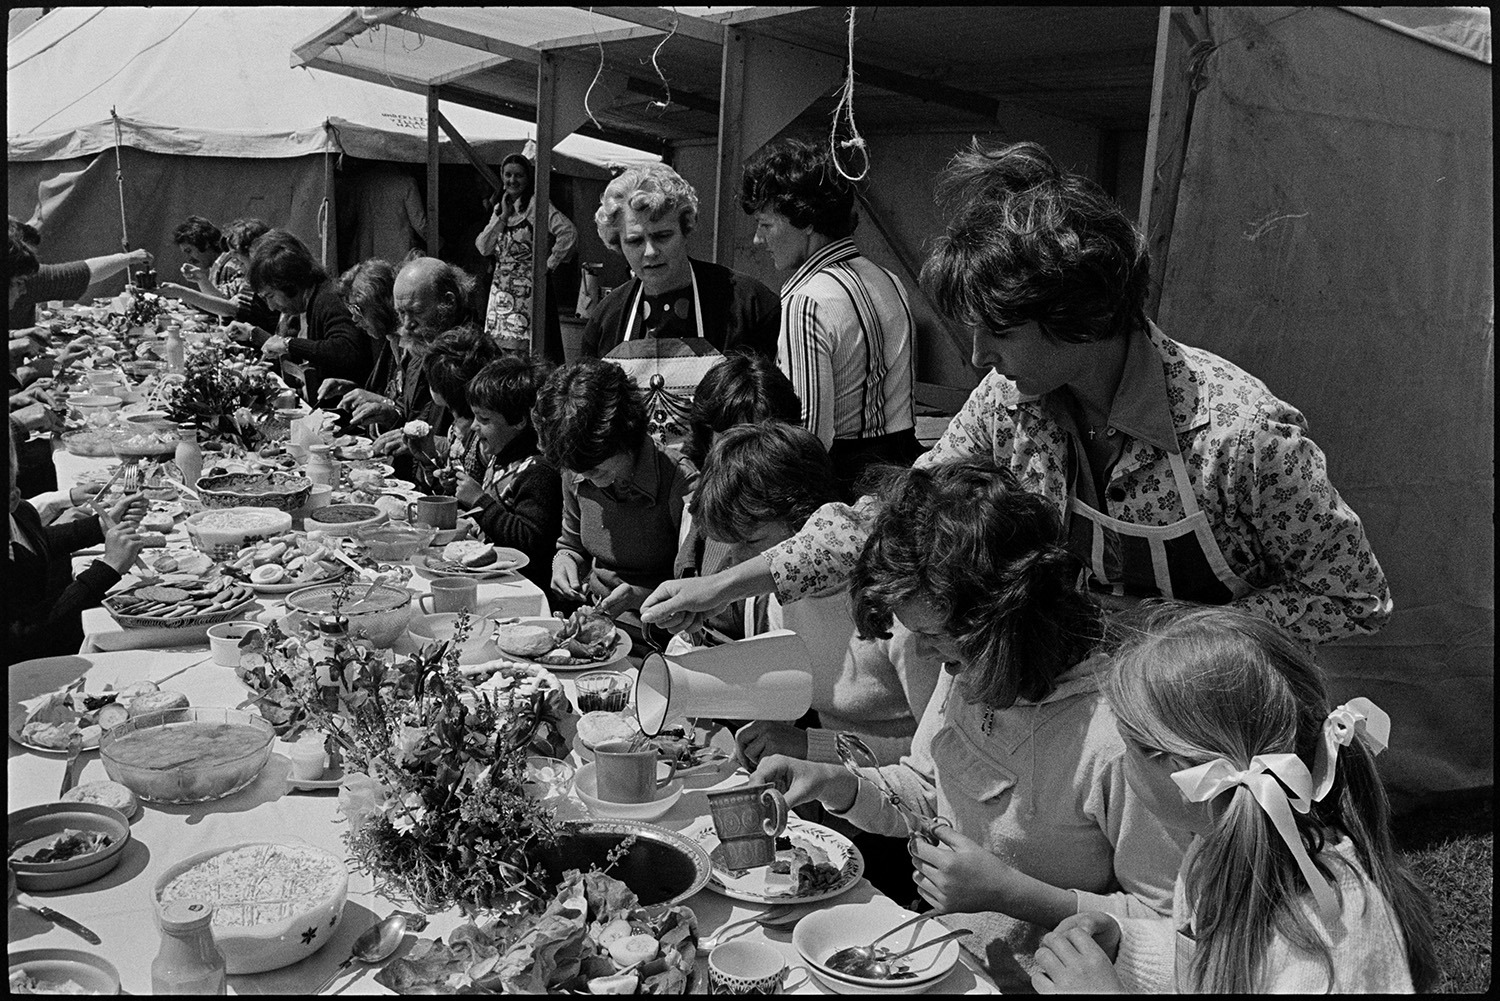 Jubilee lunch in village hall people serving food and eating. 
[Men, women and children eating a lunch to celebrate the Silver Jubilee of Queen Elizabeth II outside Atherington Village Hall. A woman is pouring a drink for one of the children from a jug.]